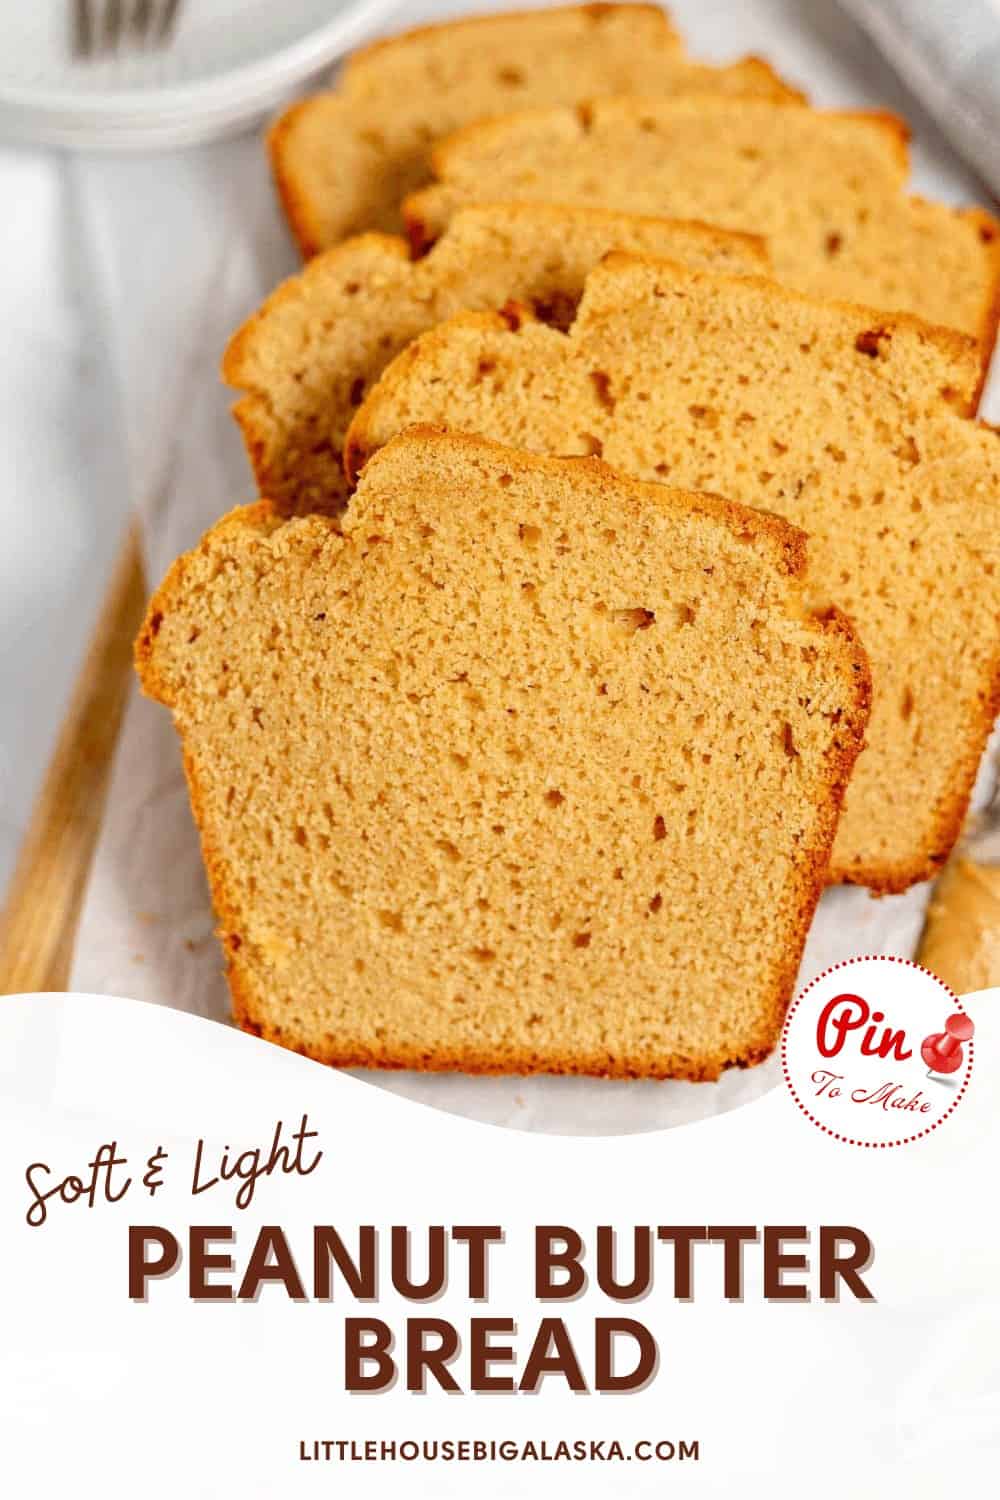 Freshly sliced peanut butter bread on a plate, advertised as soft and light.